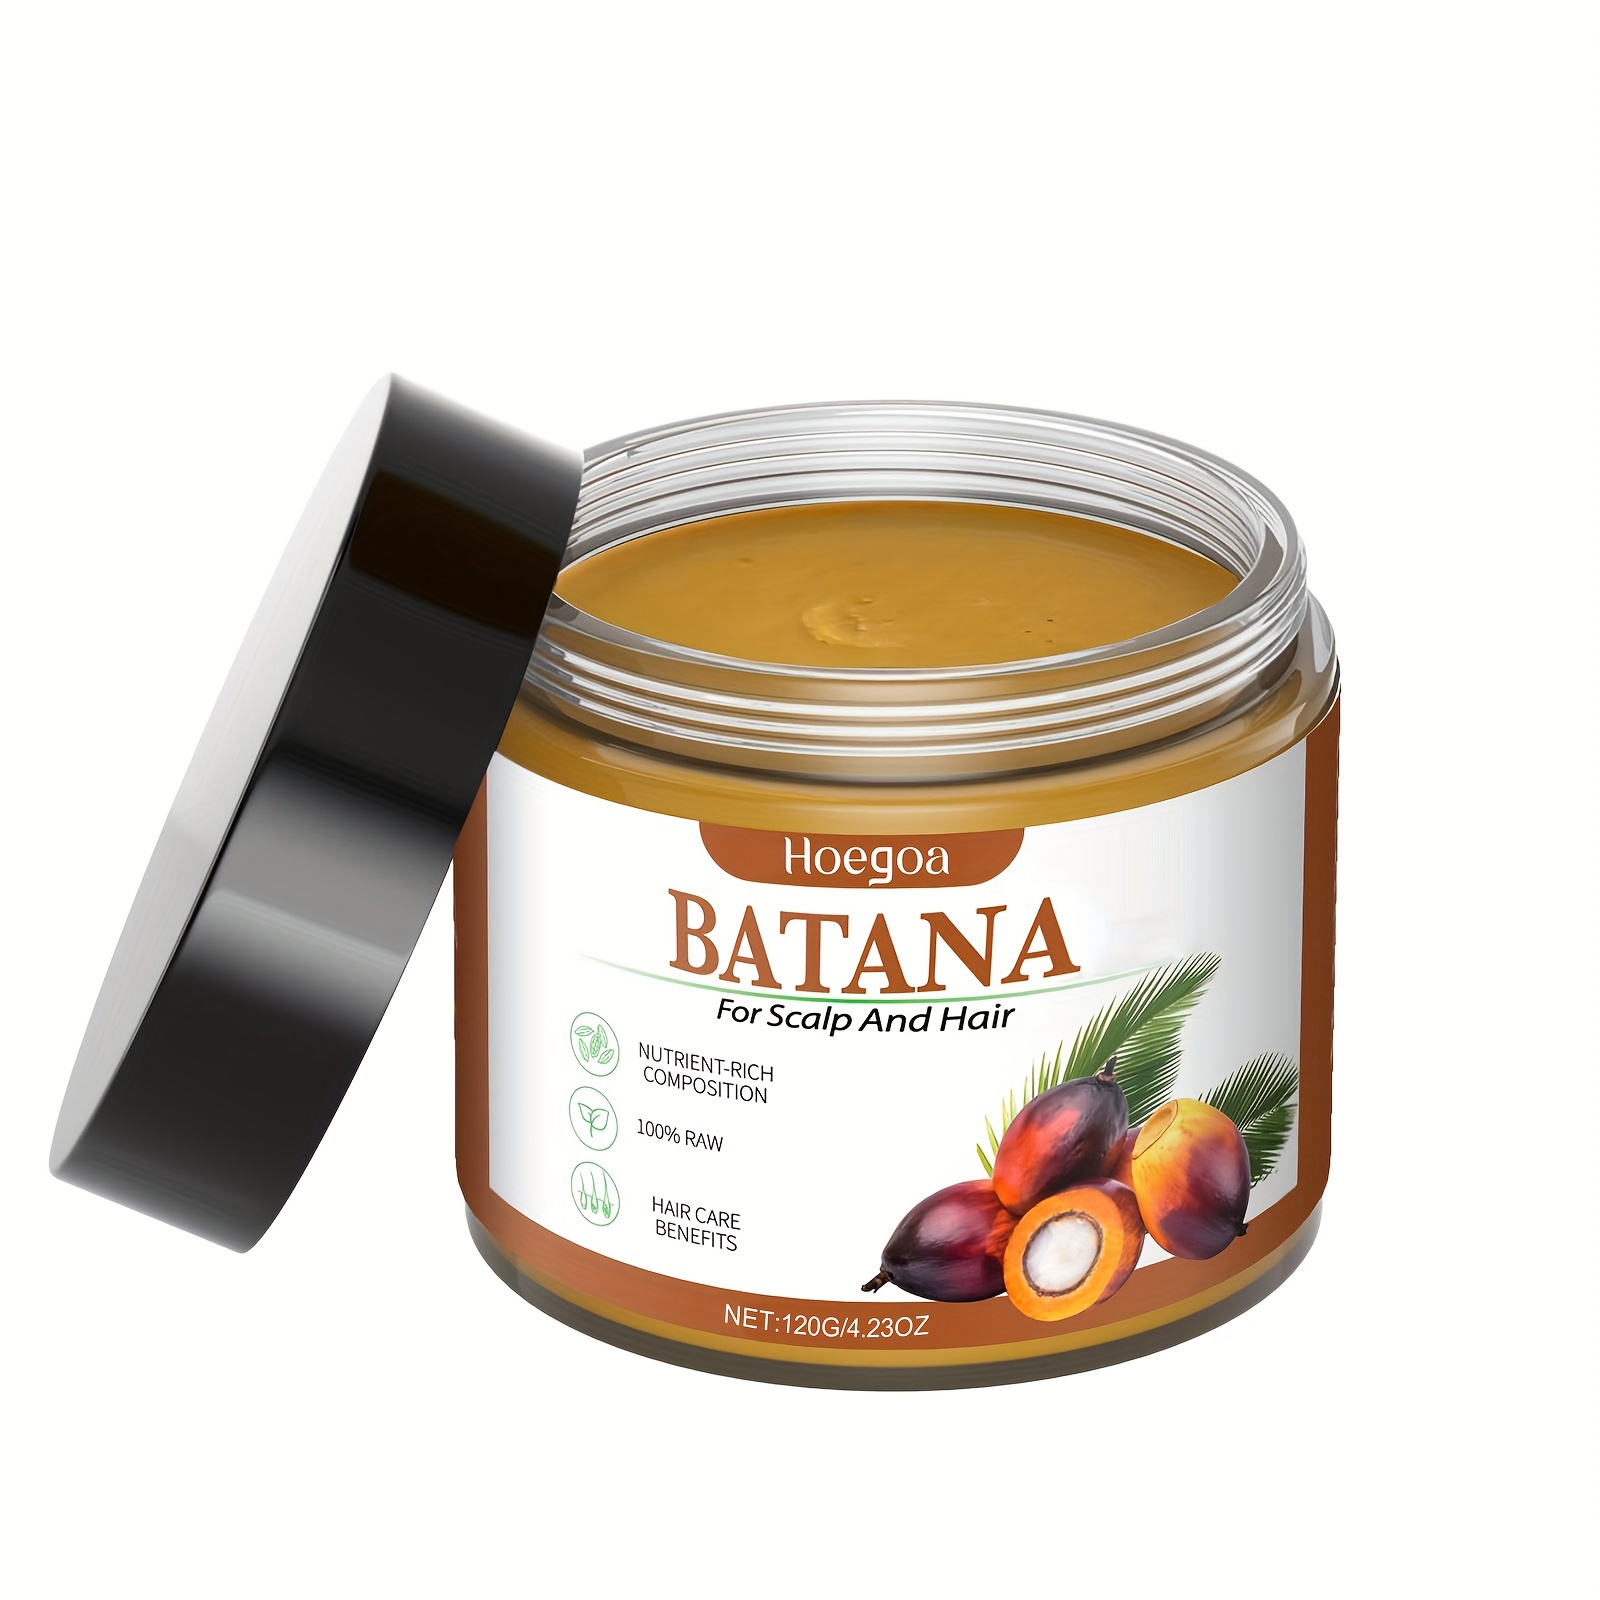 

120g Batana For Scalp And Hair, Contains Batana Oil To Soften Hair And Make It Shiny, Suitable For All Hair Types